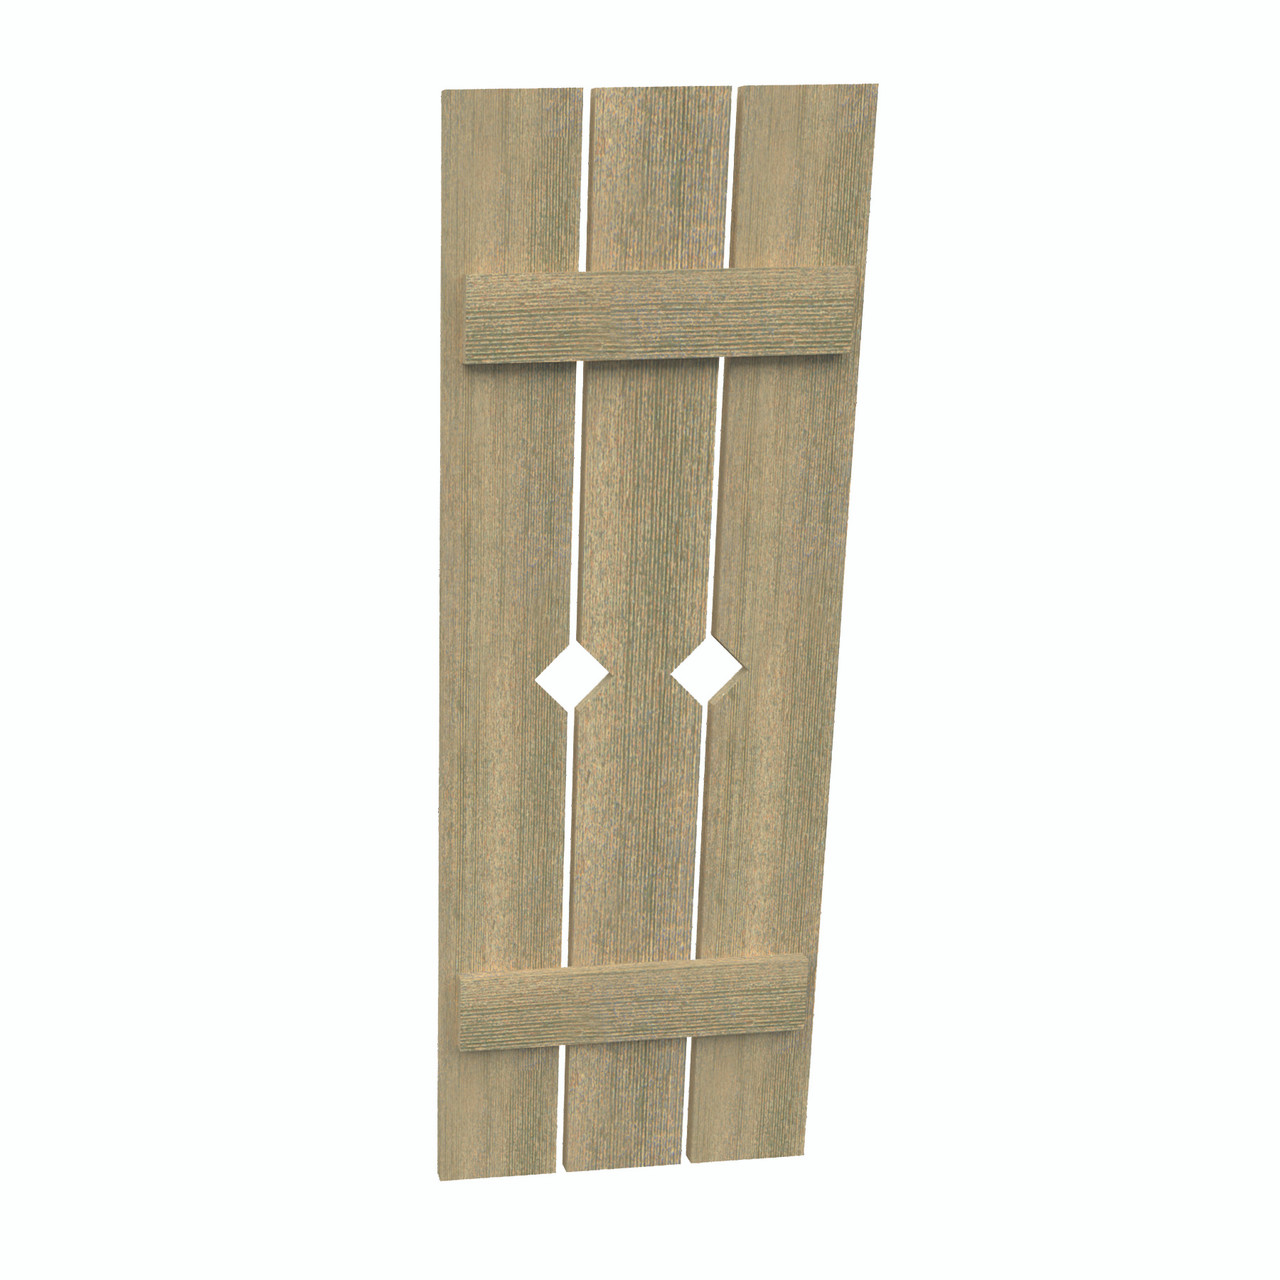 18 inch by 51 inch Plank Shutter with 3-Plank, Diamond